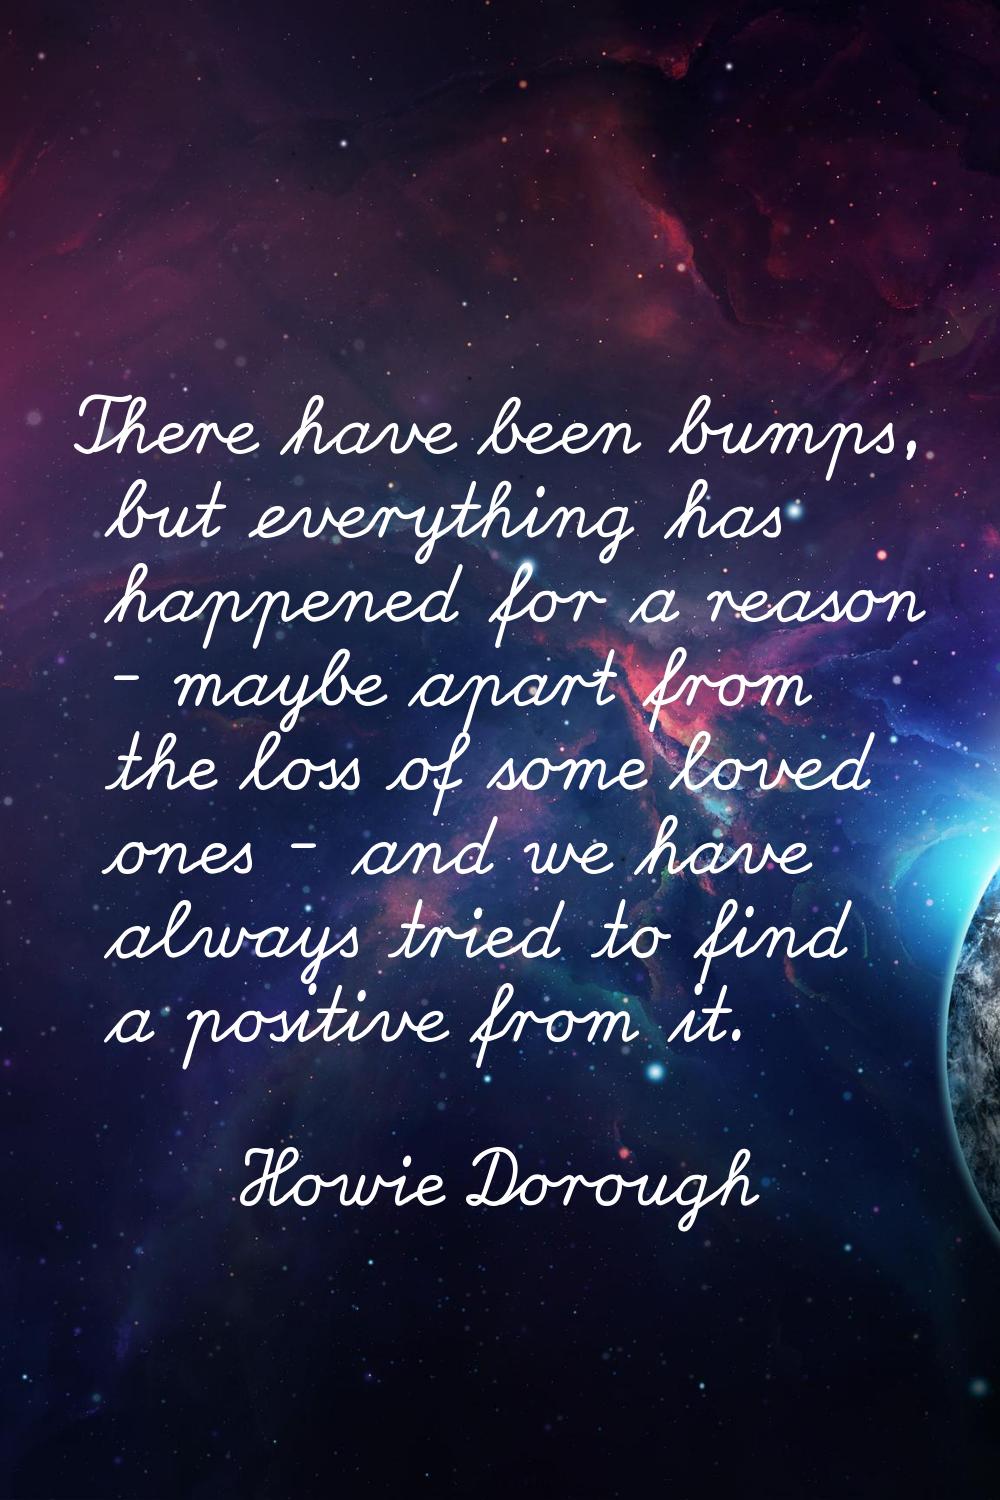 There have been bumps, but everything has happened for a reason - maybe apart from the loss of some